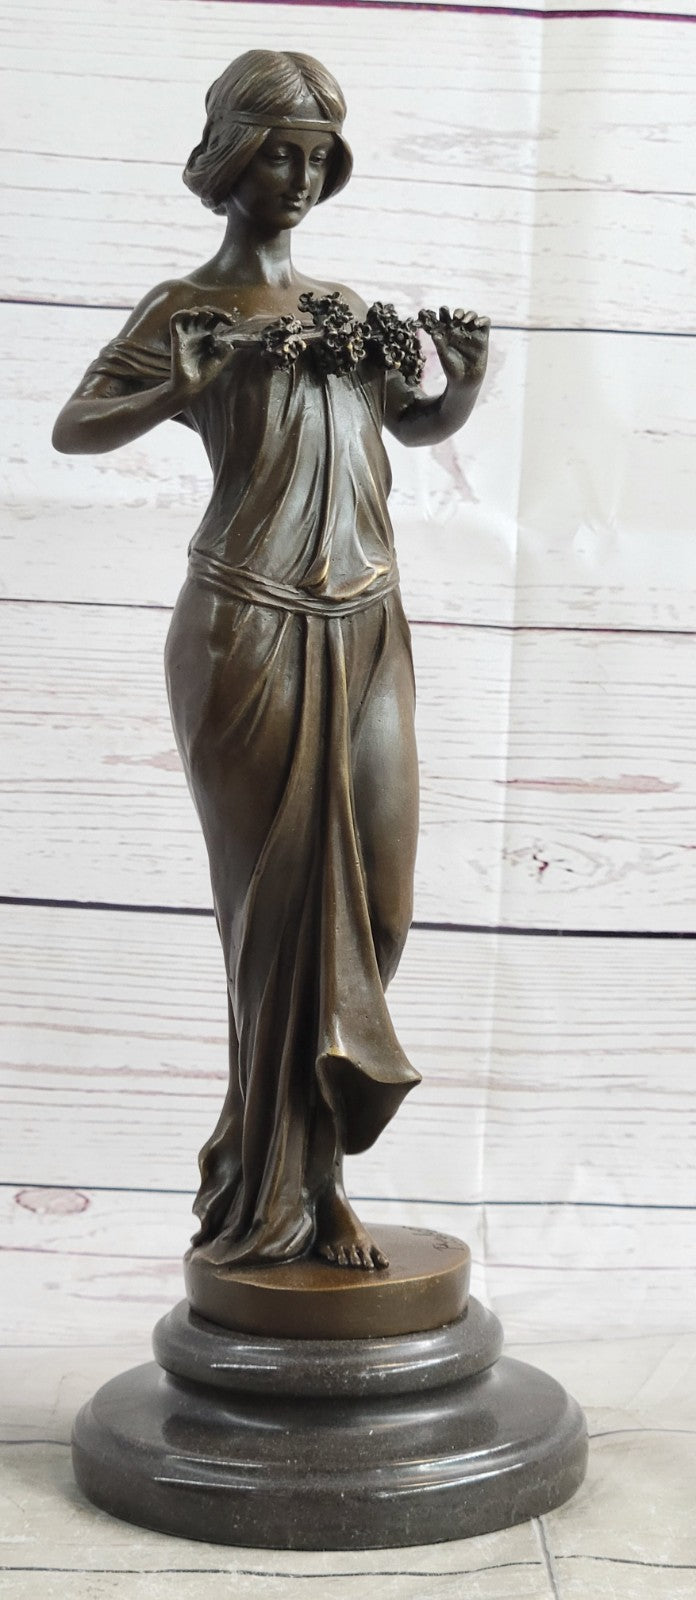 Modern bronze of Lady signed Pittaluga on marble plinth Hot Cast Figurine Décor